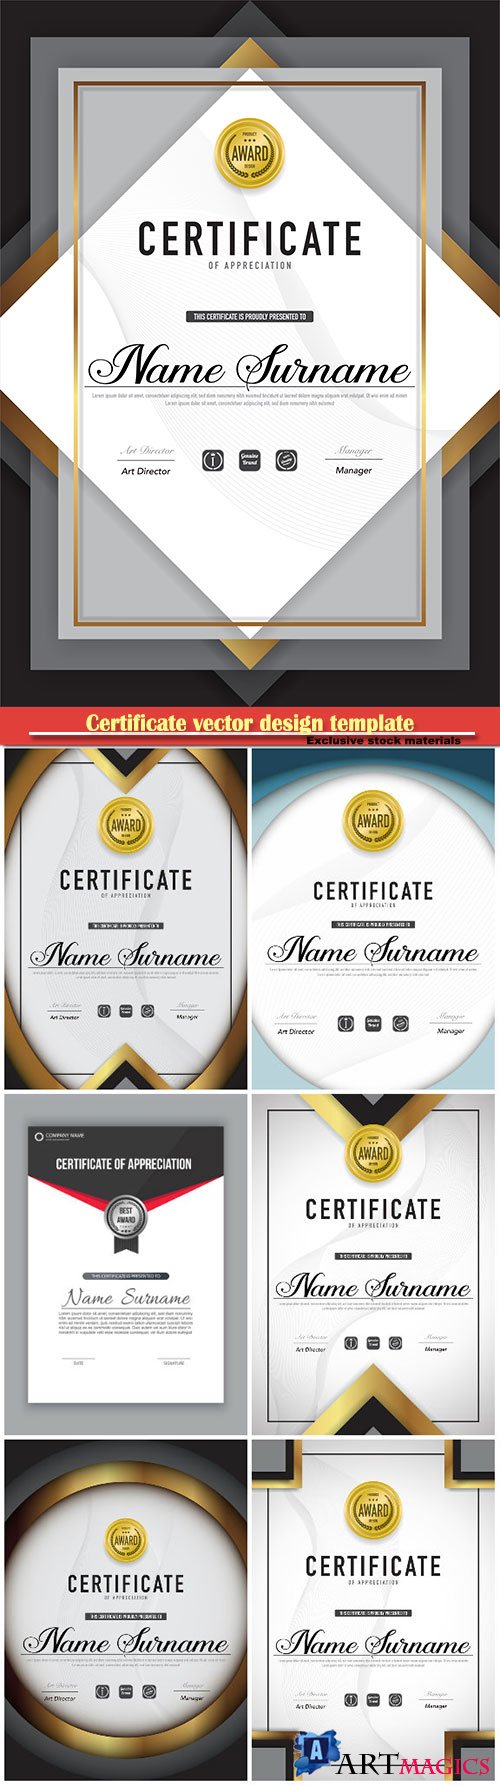 Certificate and vector diploma design template # 55